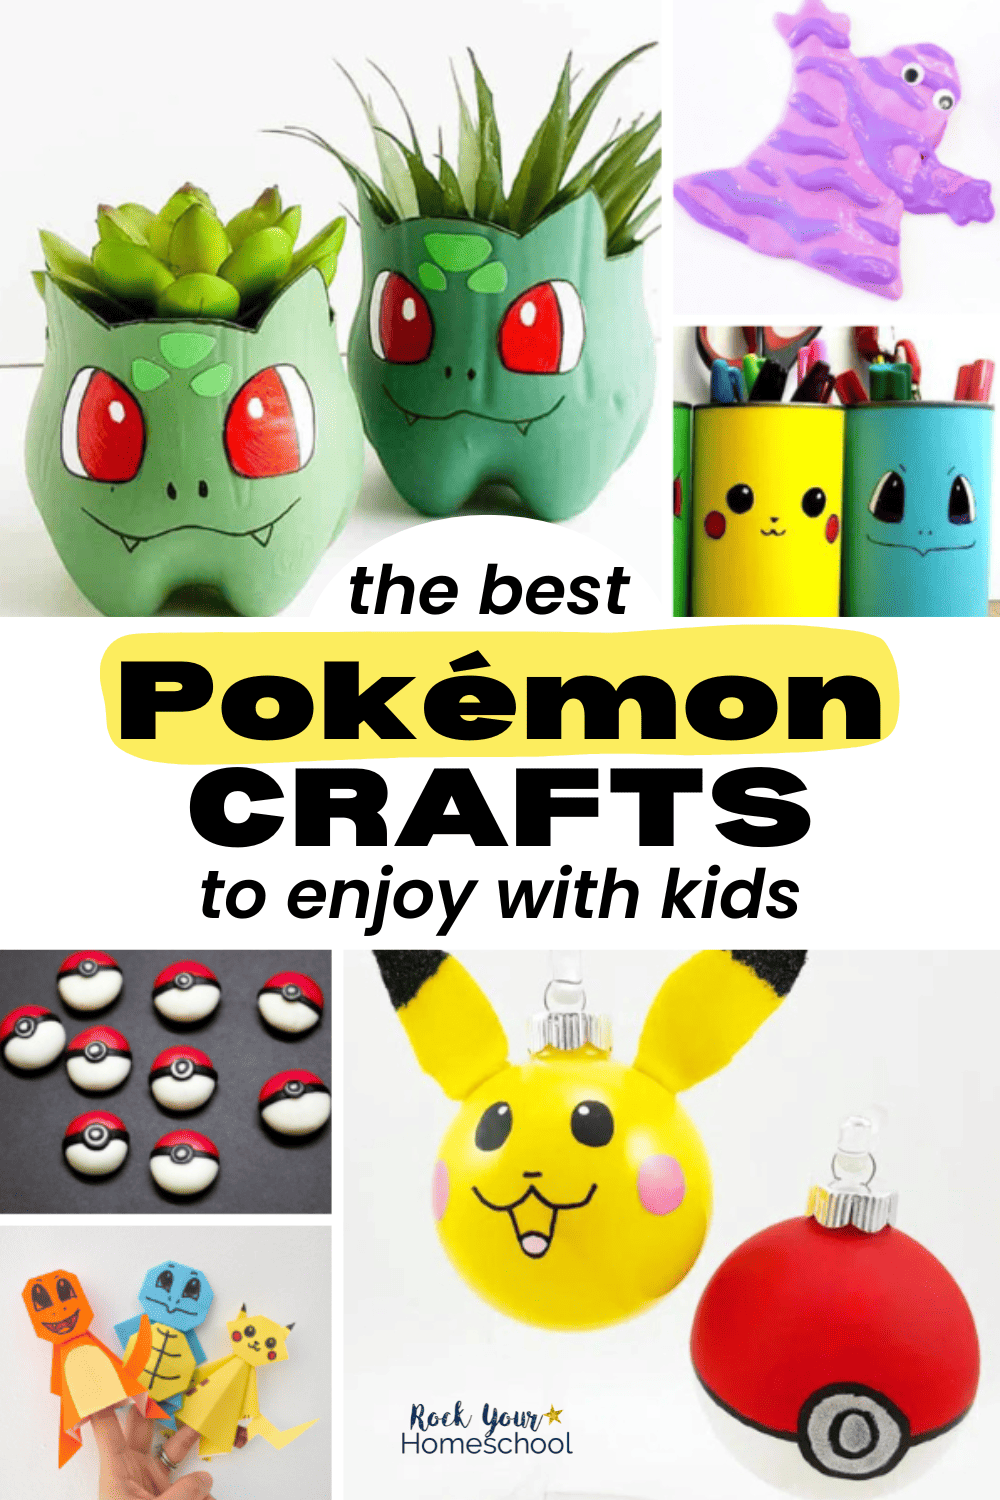 Pokémon Craft Ideas for Fun and Easy DIY Activities for Kids